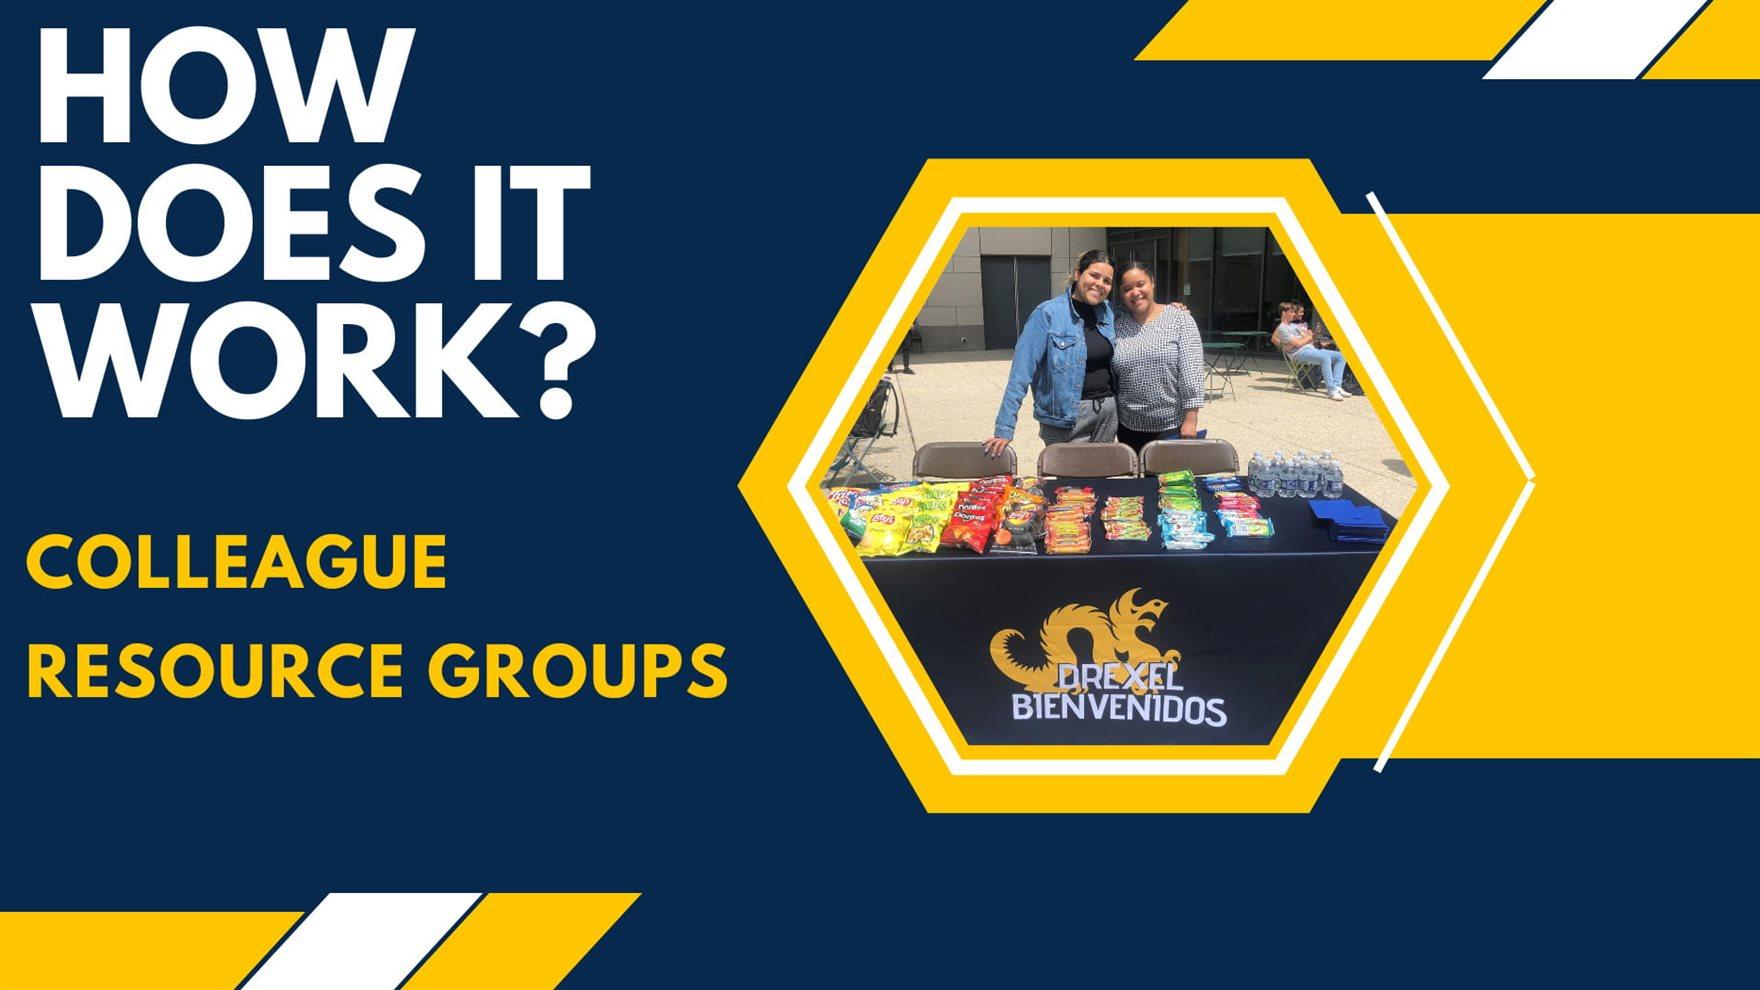 &quot;How Does It Work? Colleague Resource Groups&quot; with a photo of two people smiling at a table.